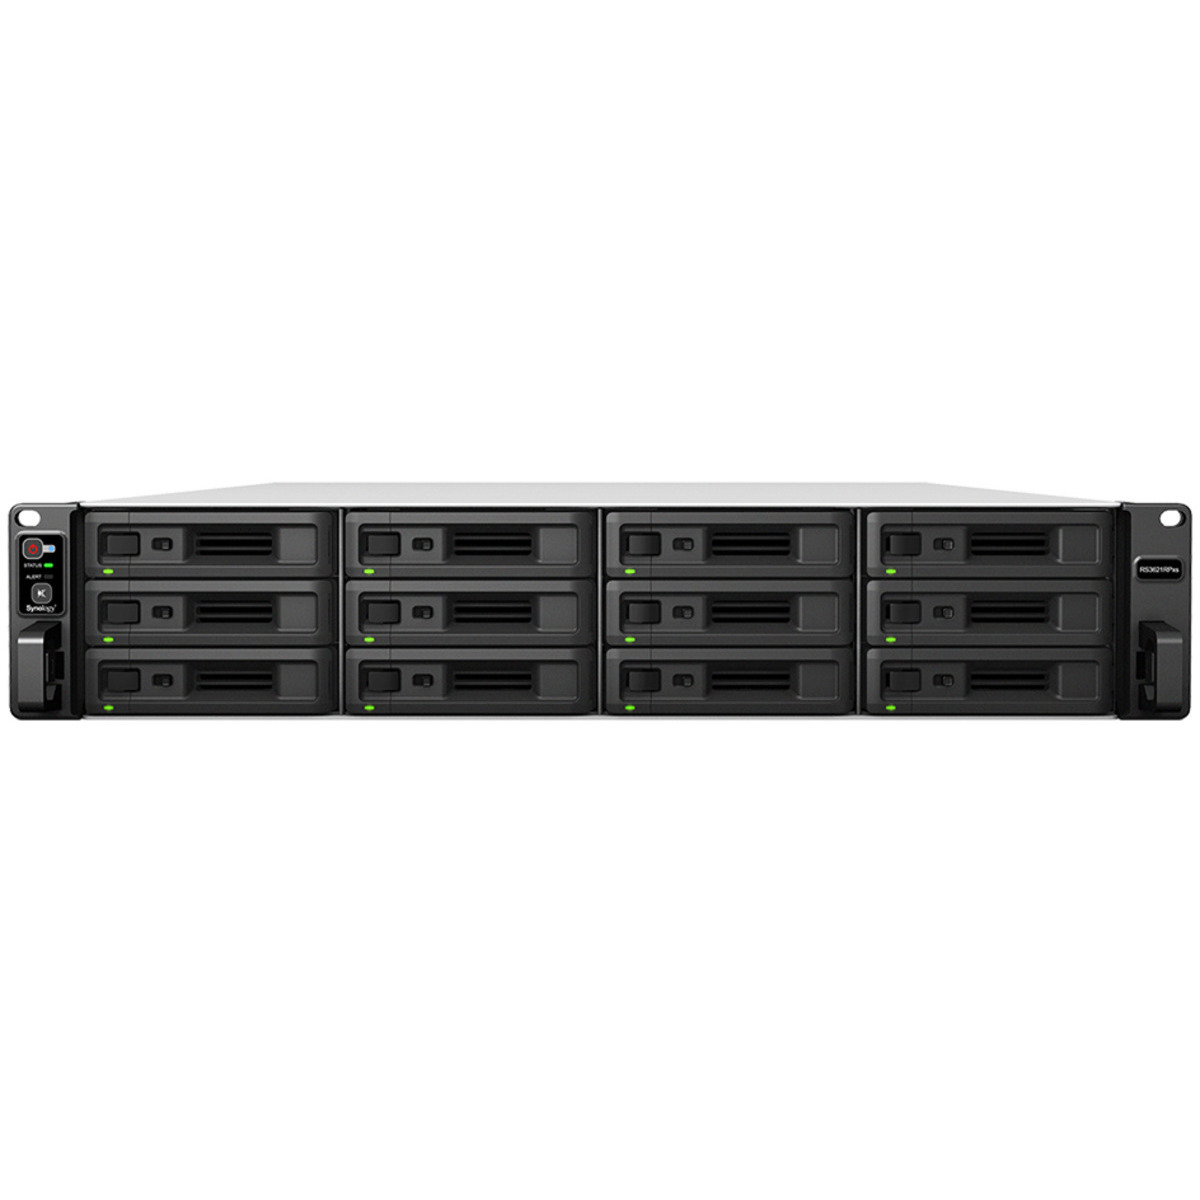 Synology RackStation RS3621RPxs 64tb 12-Bay RackMount Large Business / Enterprise NAS - Network Attached Storage Device 8x8tb Western Digital Gold WD8004FRYZ 3.5 7200rpm SATA 6Gb/s HDD ENTERPRISE Class Drives Installed - Burn-In Tested RackStation RS3621RPxs